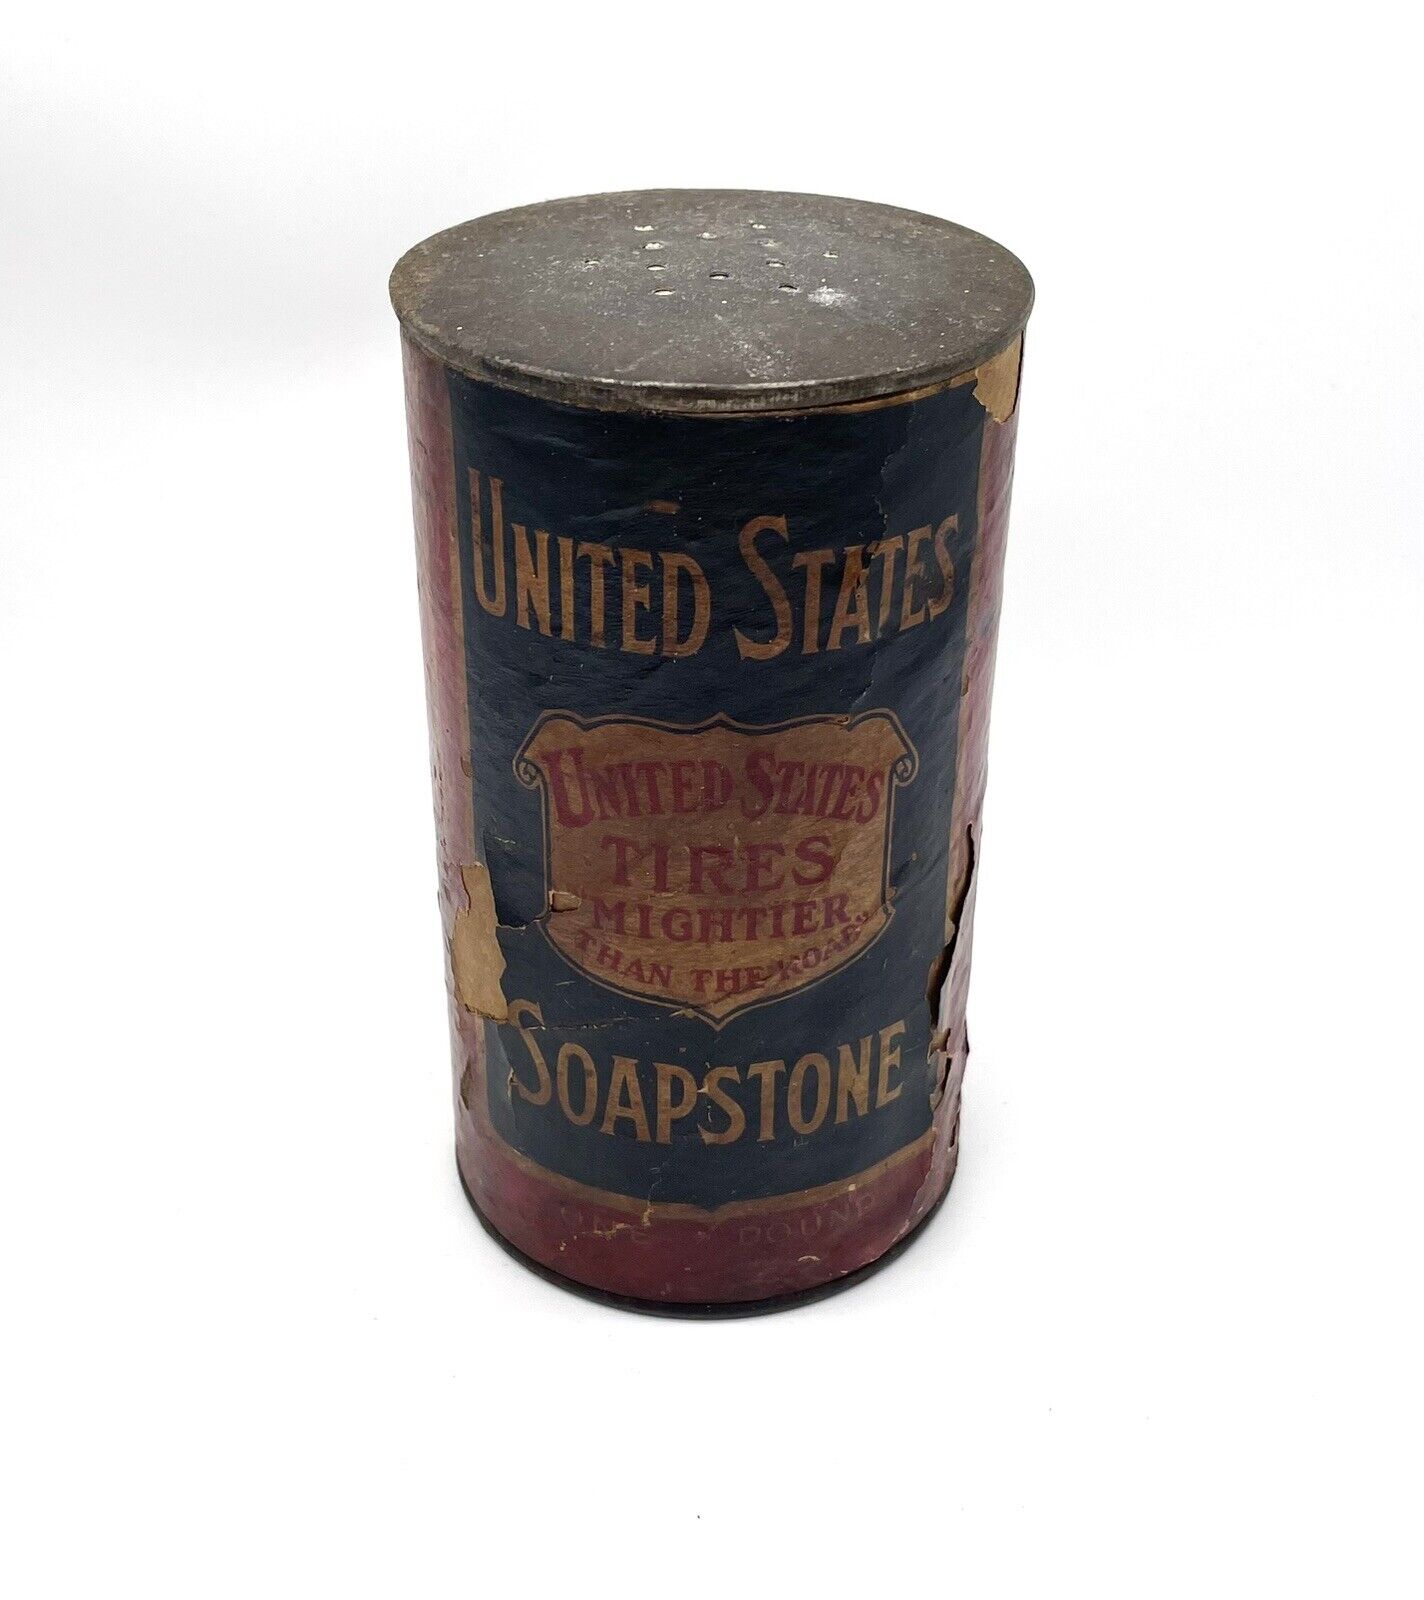 Vintage 1950s United States Soapstone Tire Repair Paper Label Tin Can R